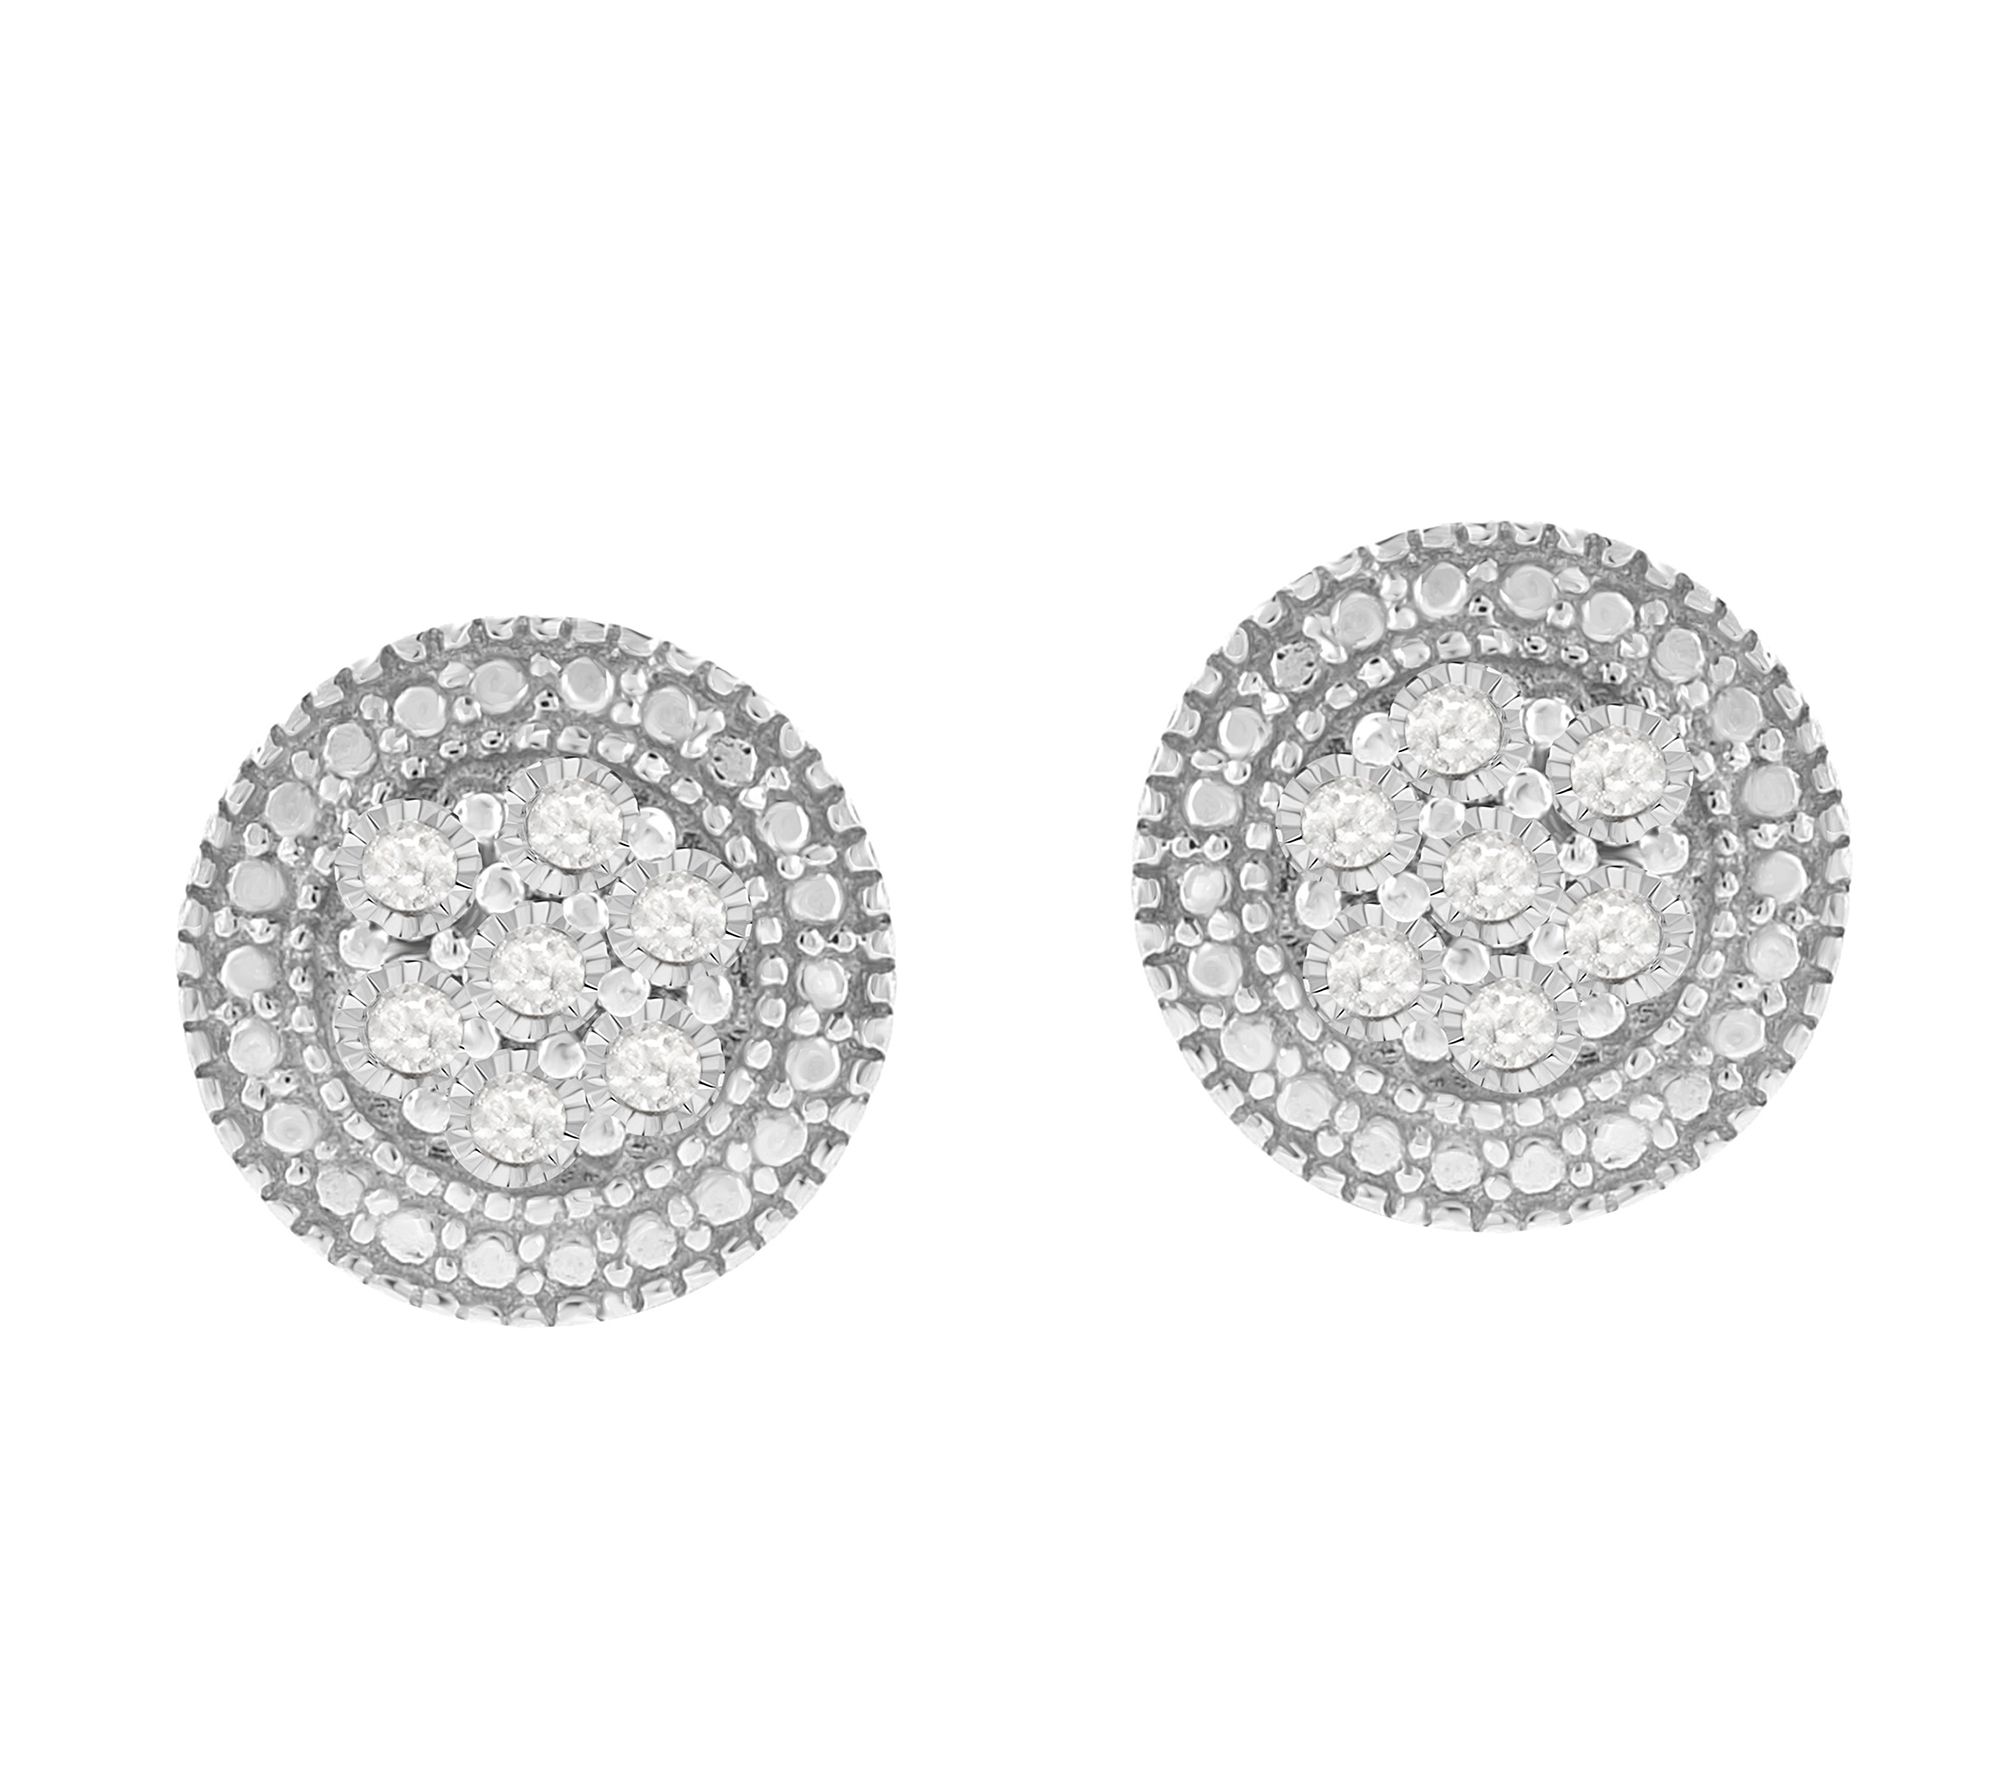 Affinity 1/7 cttw Diamond Earrings, Sterling Silver - QVC.com